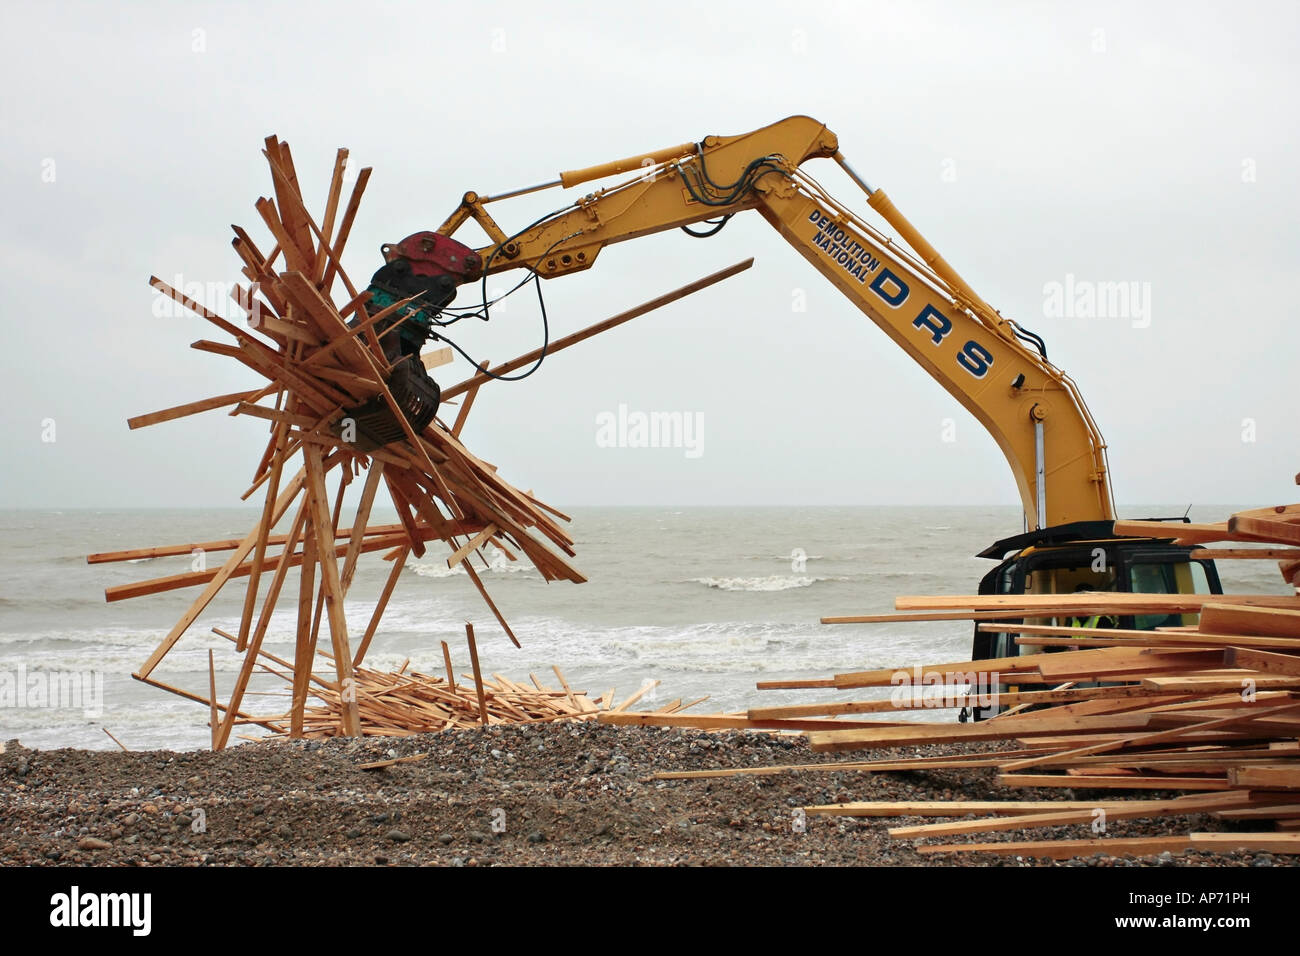 Komatsu PC210 LC crawler excavator clearing up wood from the wreckage of the cargo ship 'Ice Prince'. Worthing beach West Sussex Stock Photo